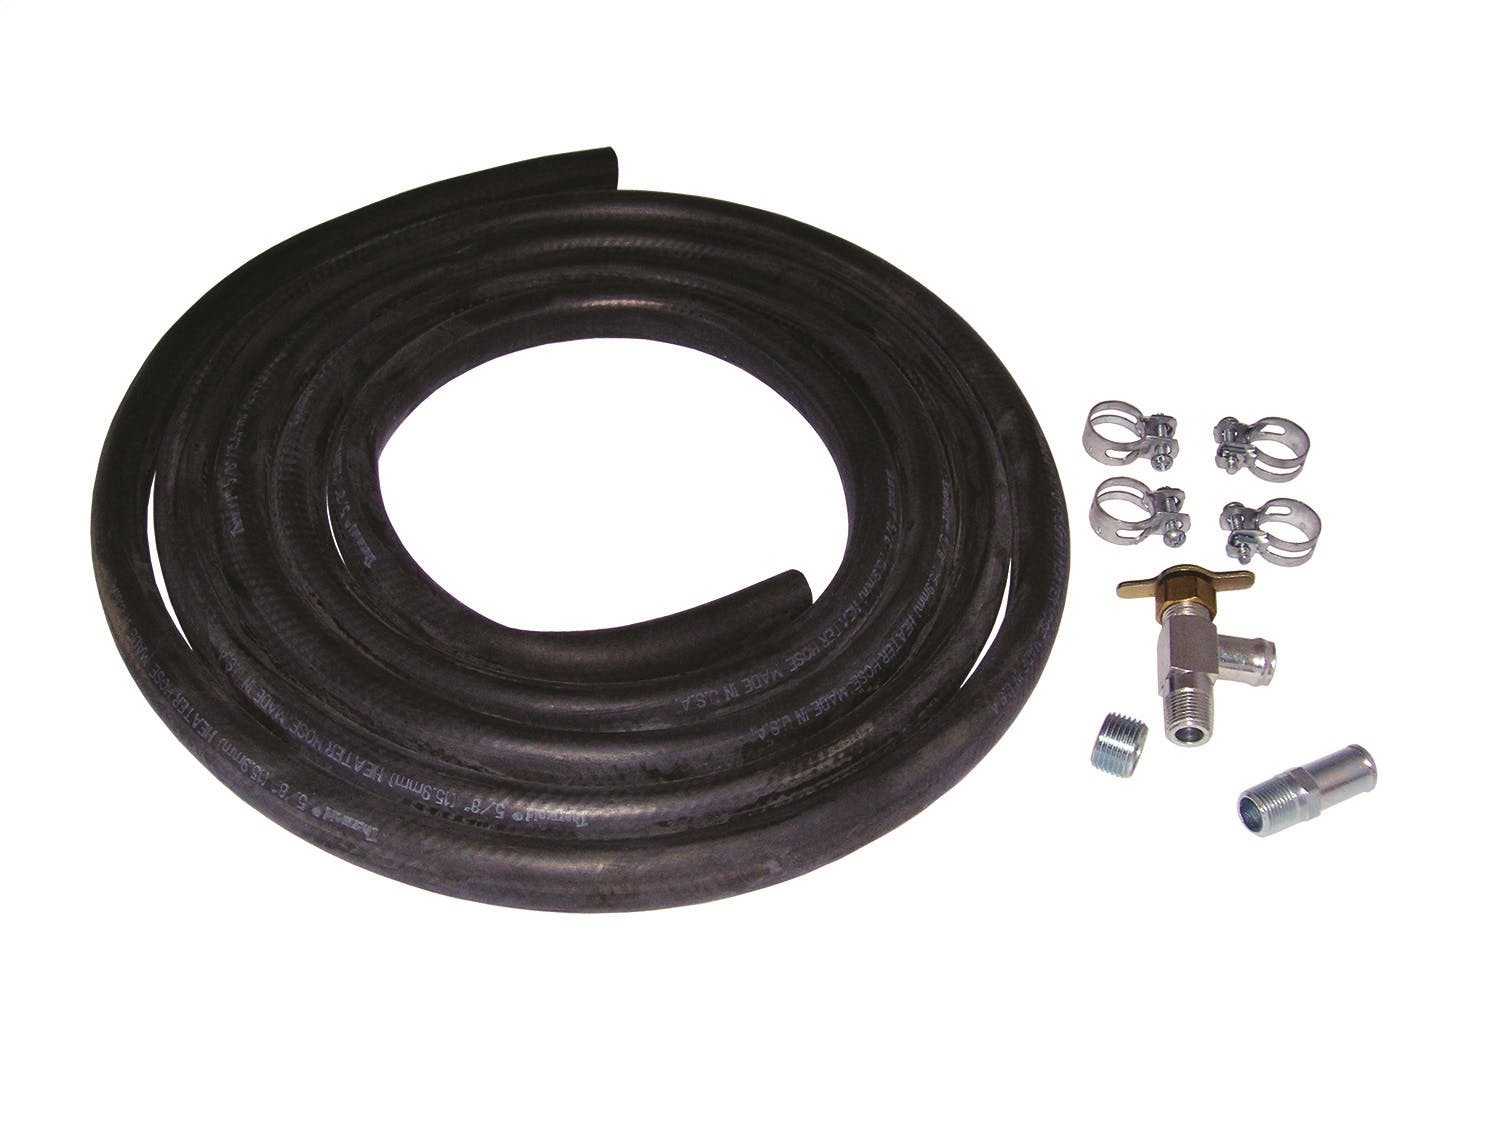 Maradyne H-64006 Heater Hose kit - 150 inch heater hose, clamps, valve, and fittings